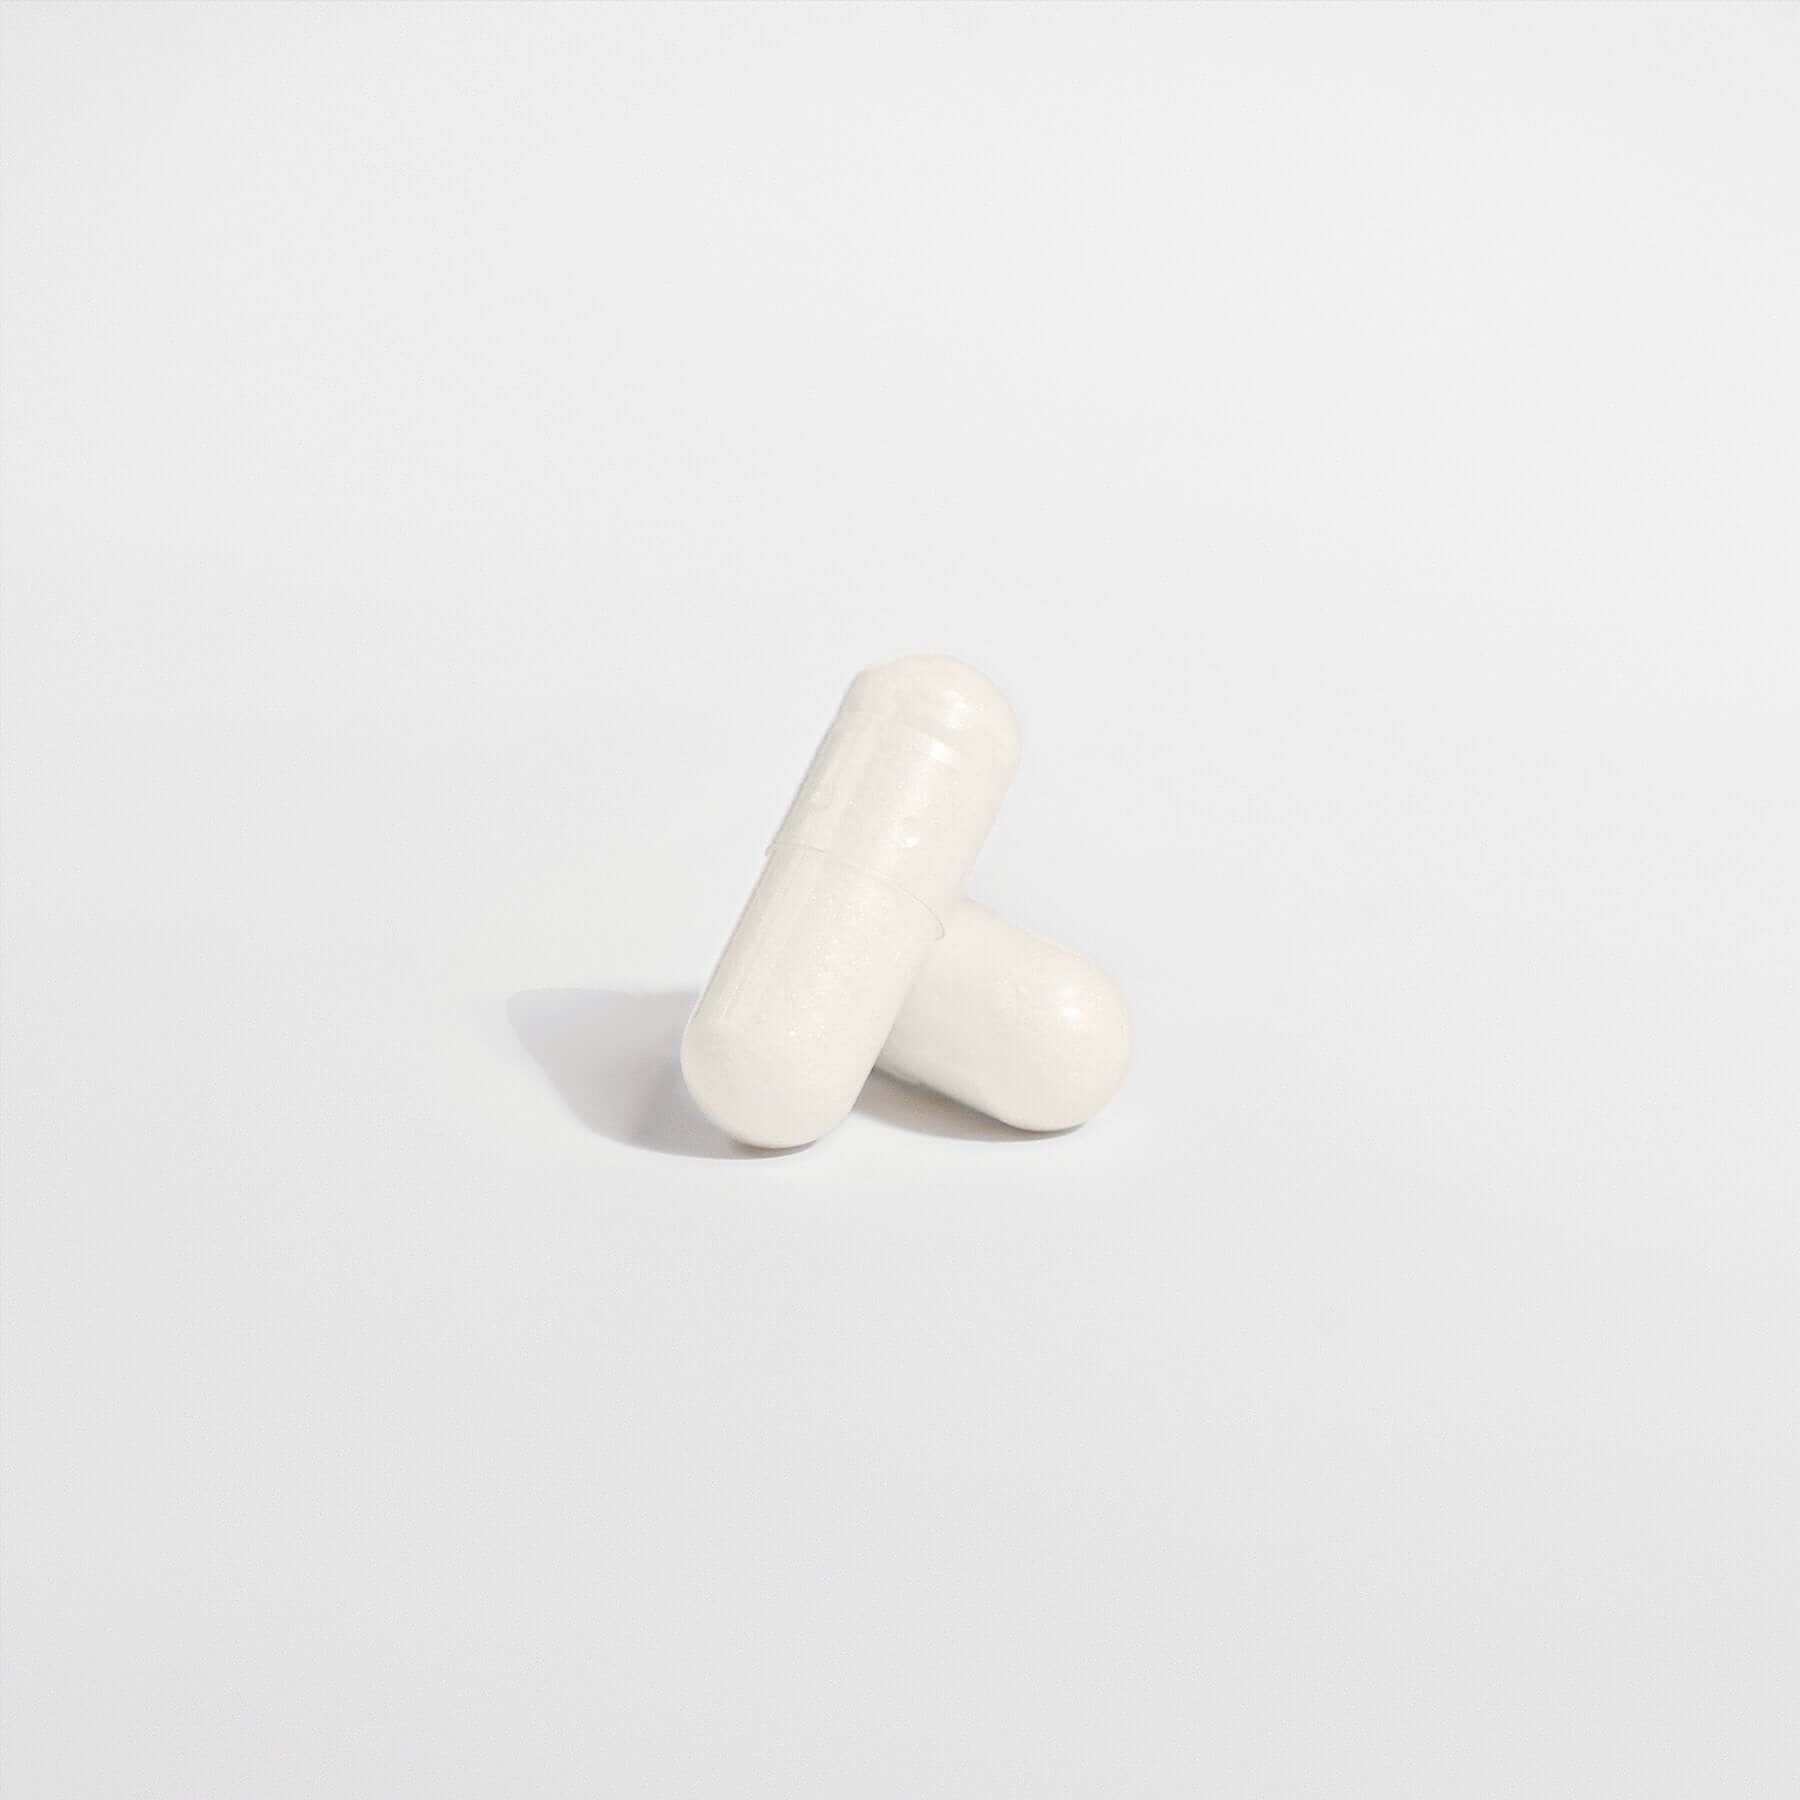 Two Capsules of 5 HTP